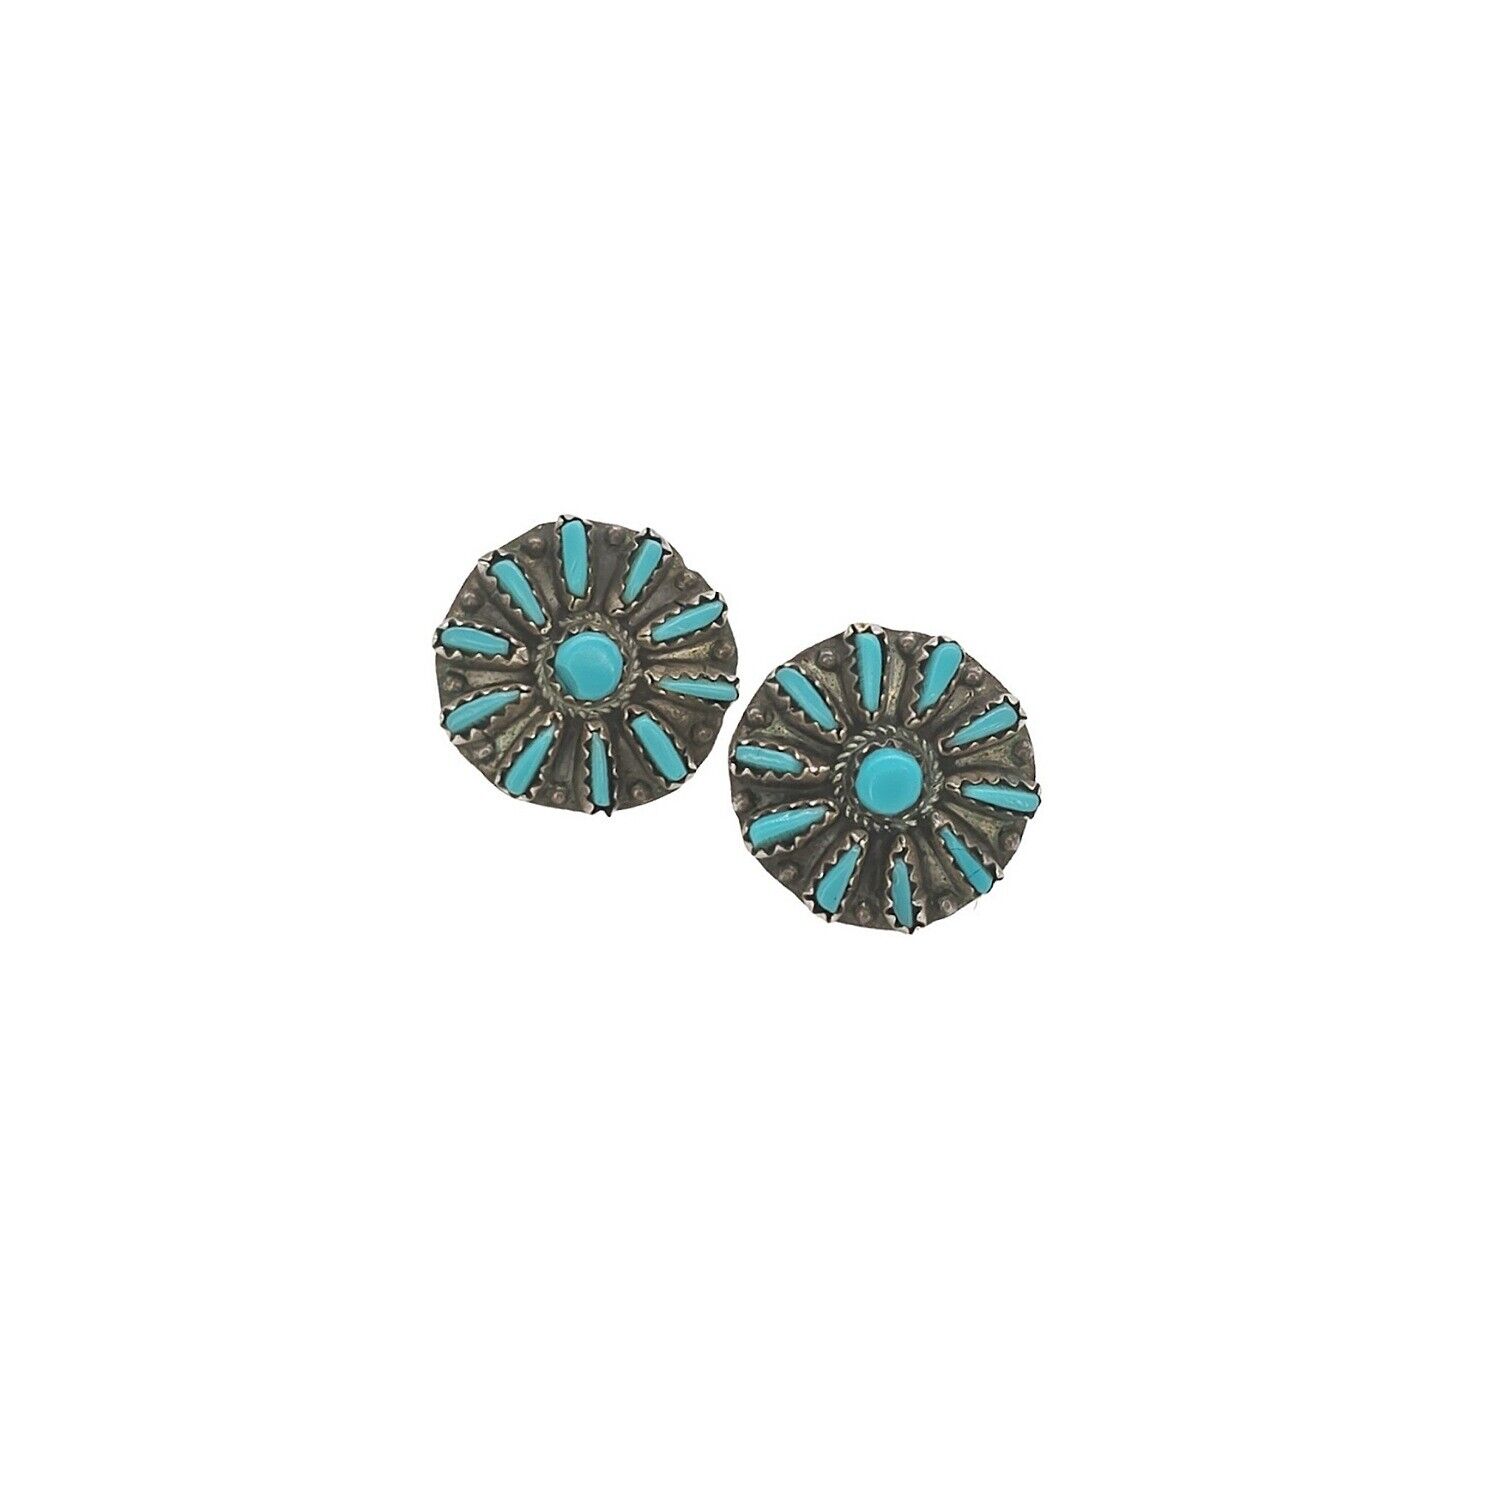 Native American Sterling Silver & Petit Point Turquoise Earrings